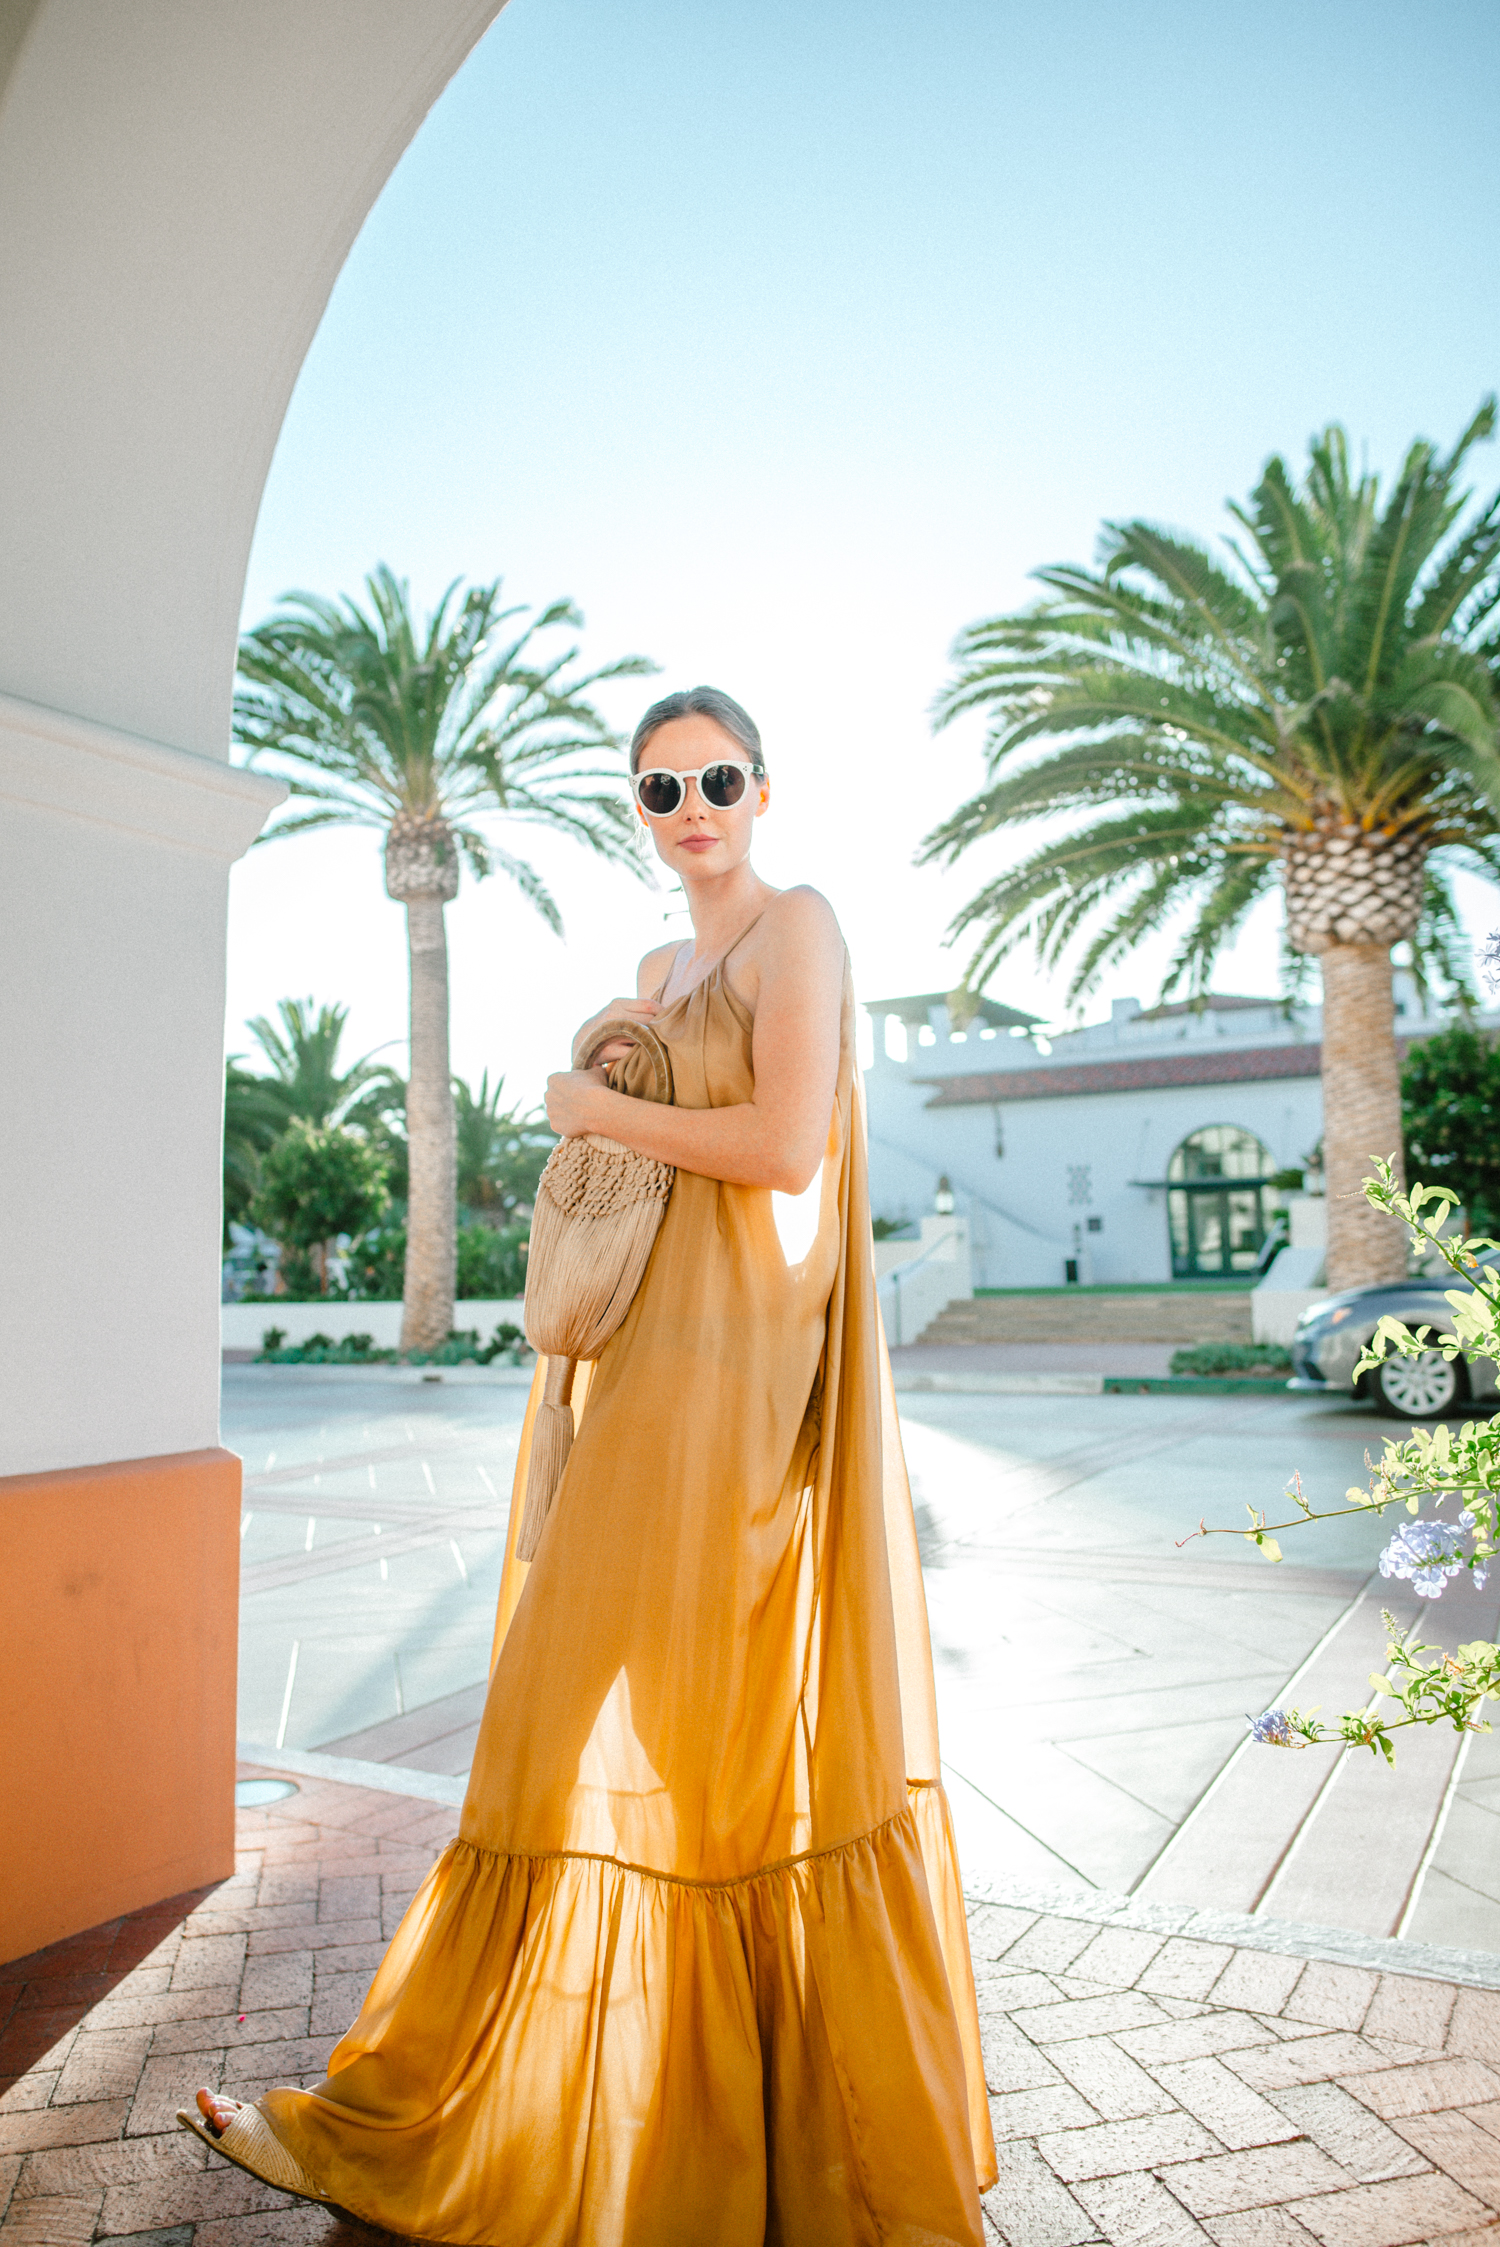 Alyssa Campanella of The A List blog visits Hotel Californian in Santa Barbara with Torrance Coombs wearing Kalita Brigitte dress and Cult Gaia Angelou bag for an anniversary trip.